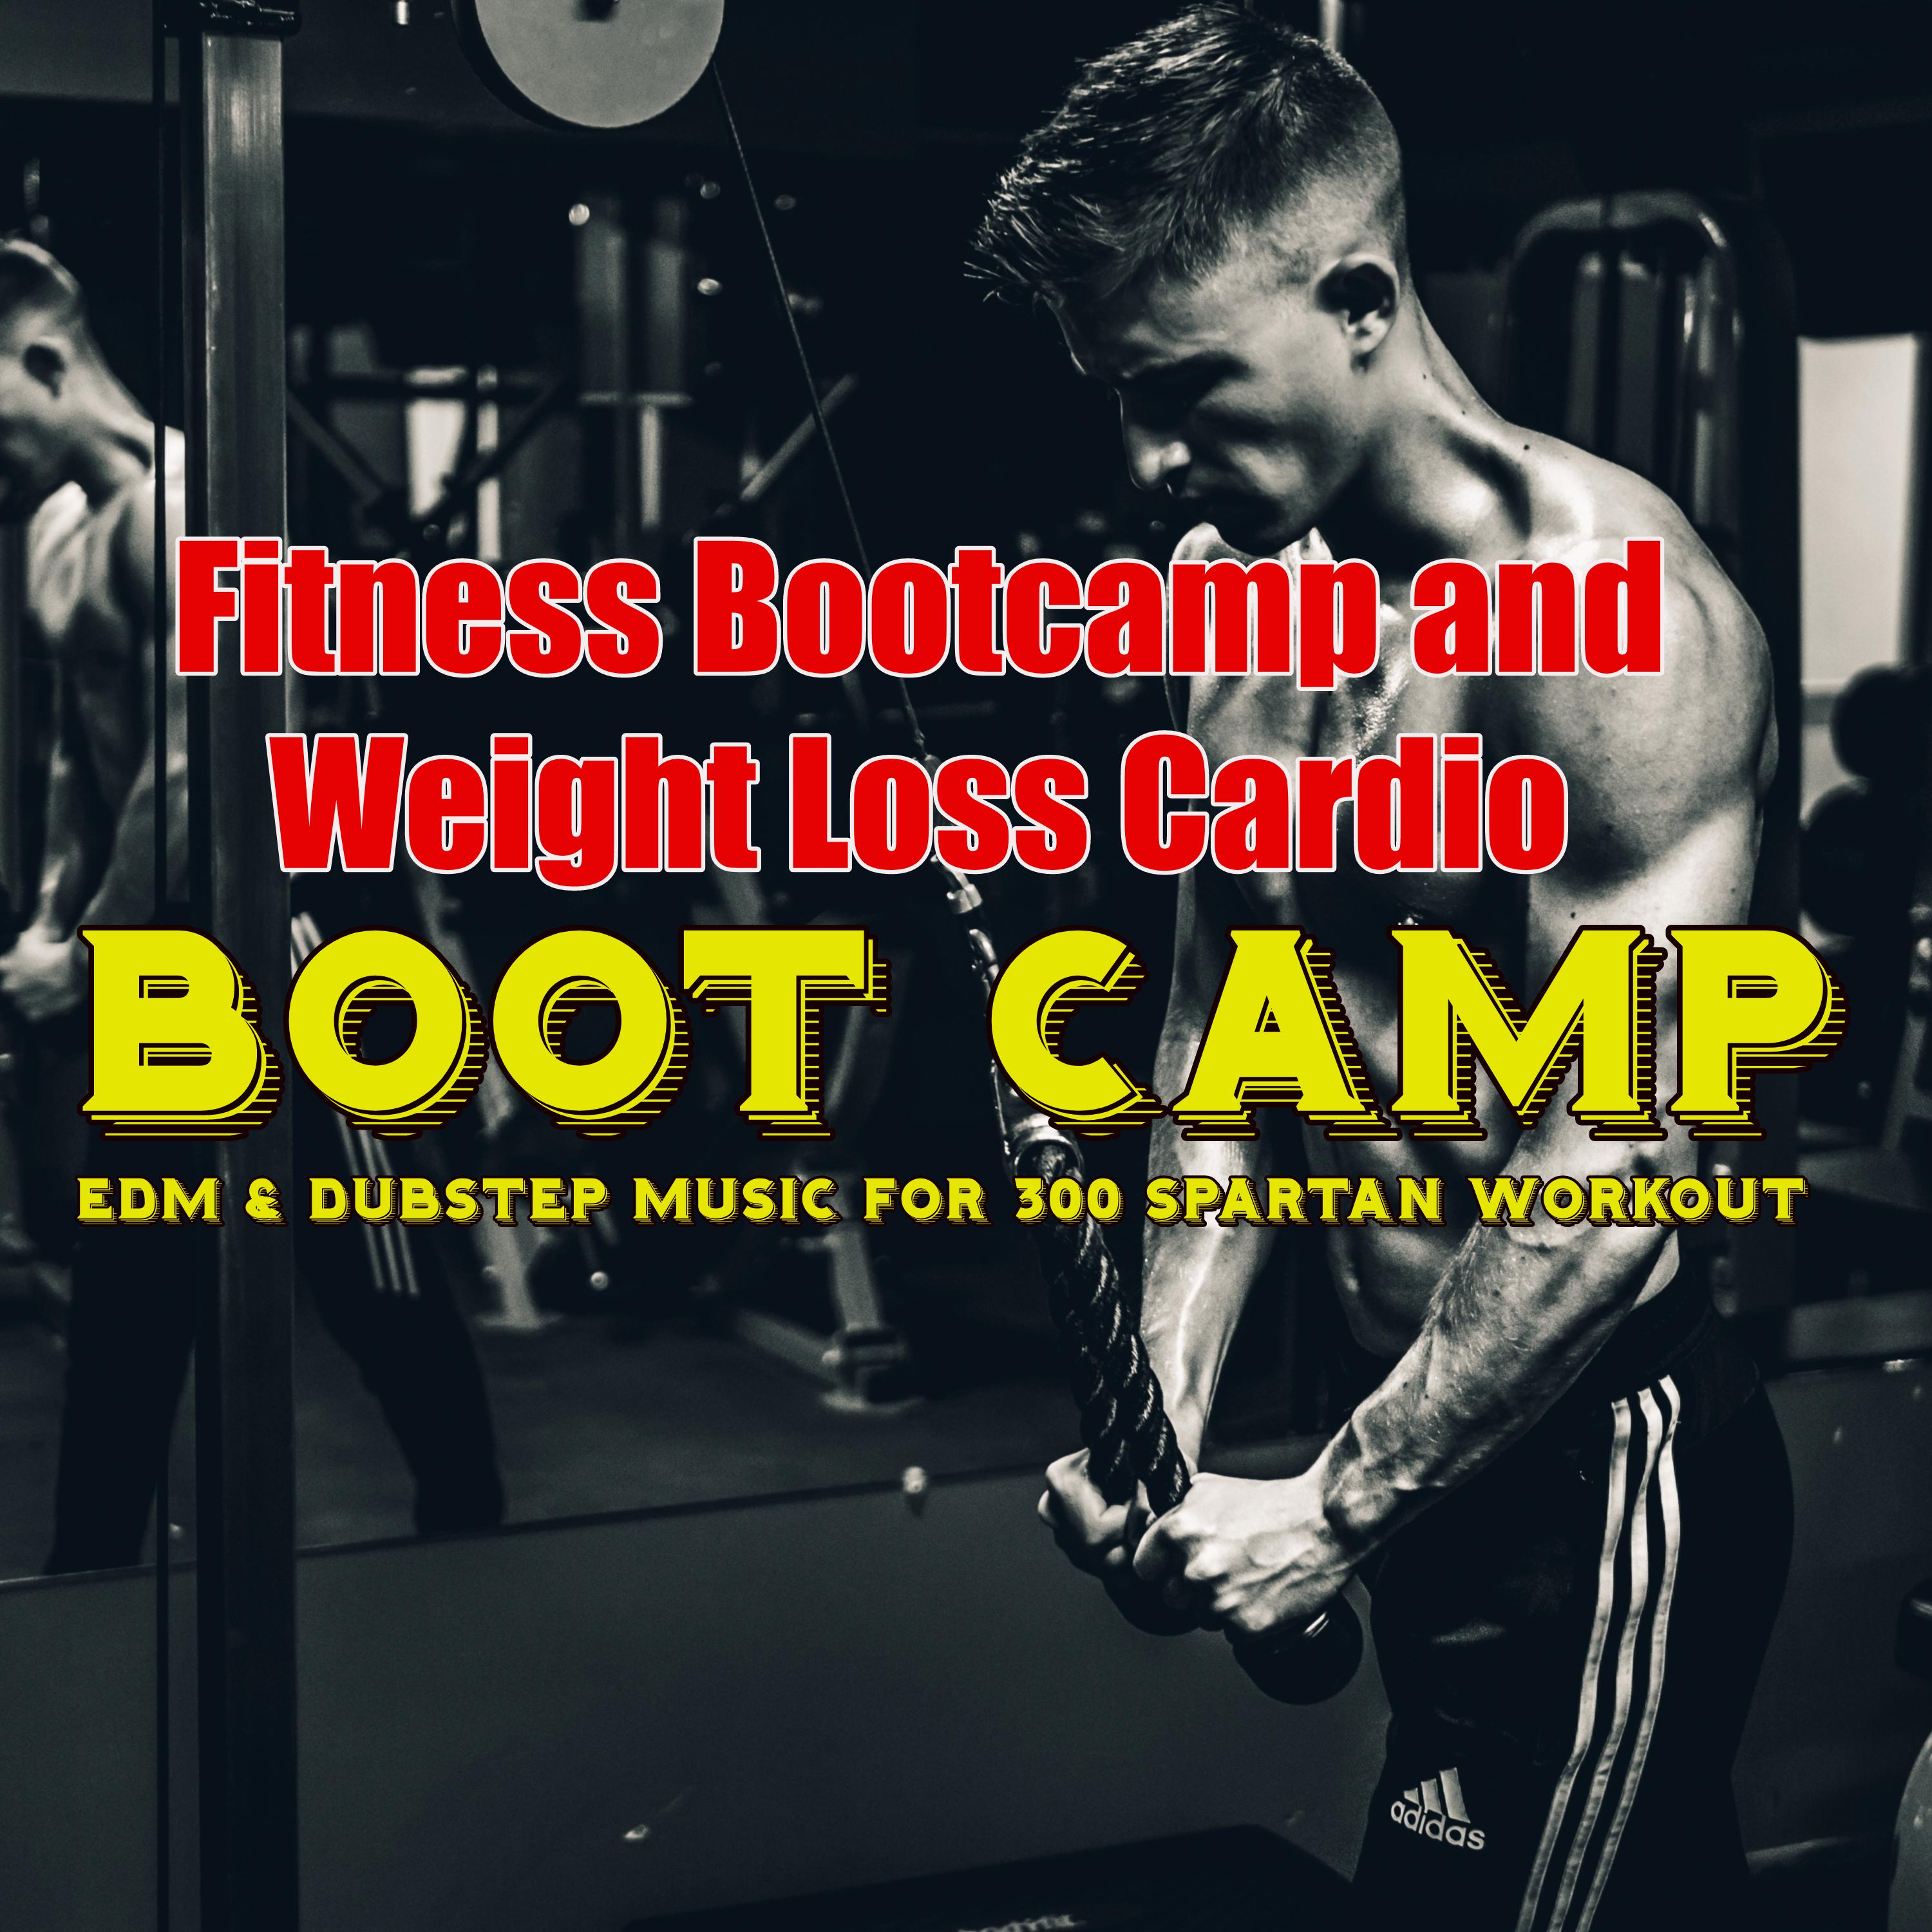 Boot Camp  EDM  Dubstep Music for 300 Spartan Workout, Fitness Bootcamp and Weight Loss Cardio